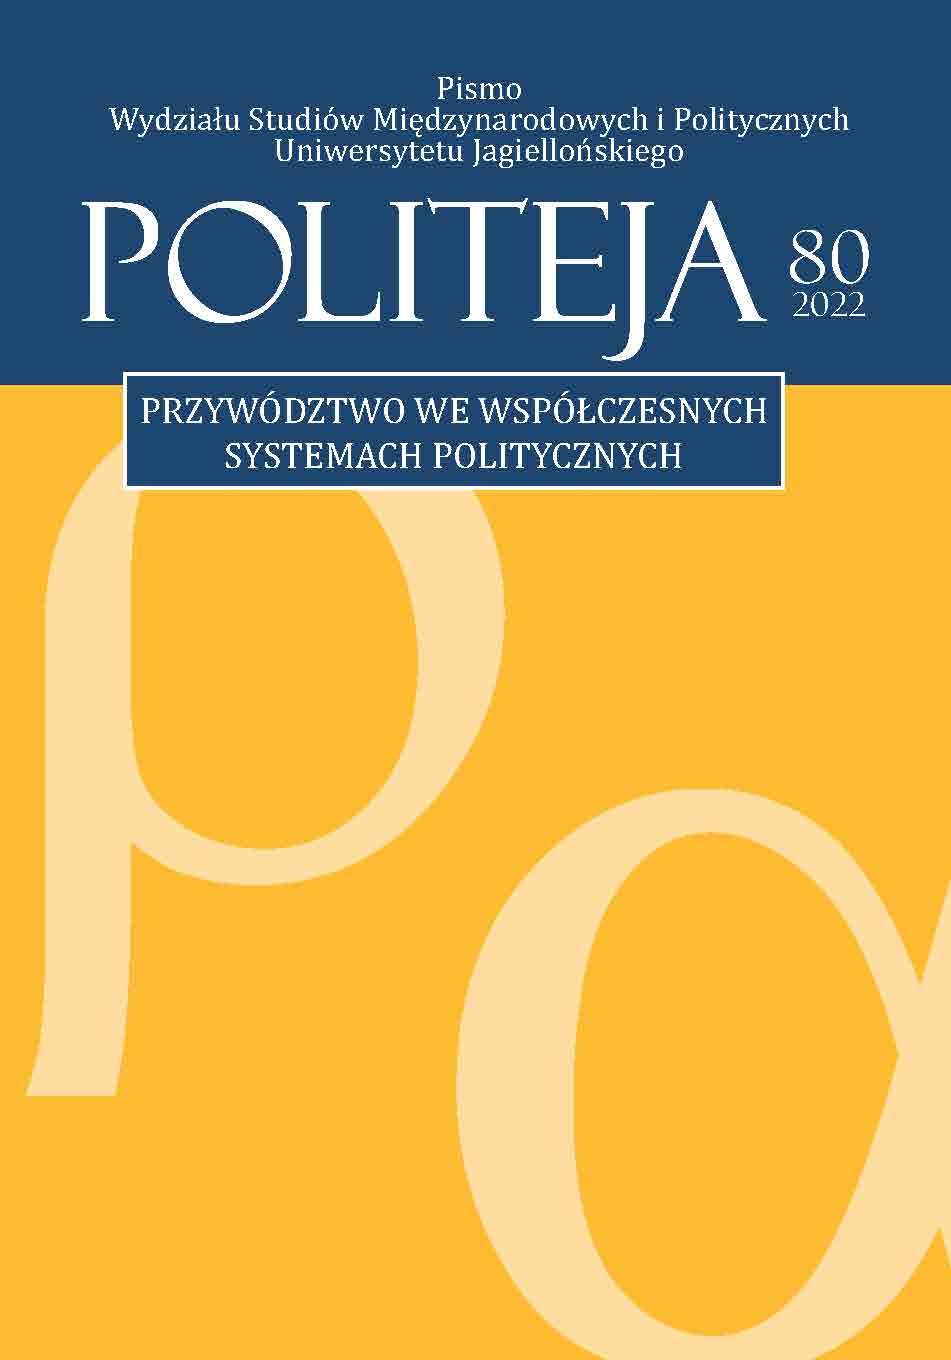 From  Presidentialism  to  Command  Democracy:  The  Evolution  of  Political  System and Leadership Models in The Second Polish Republic Cover Image